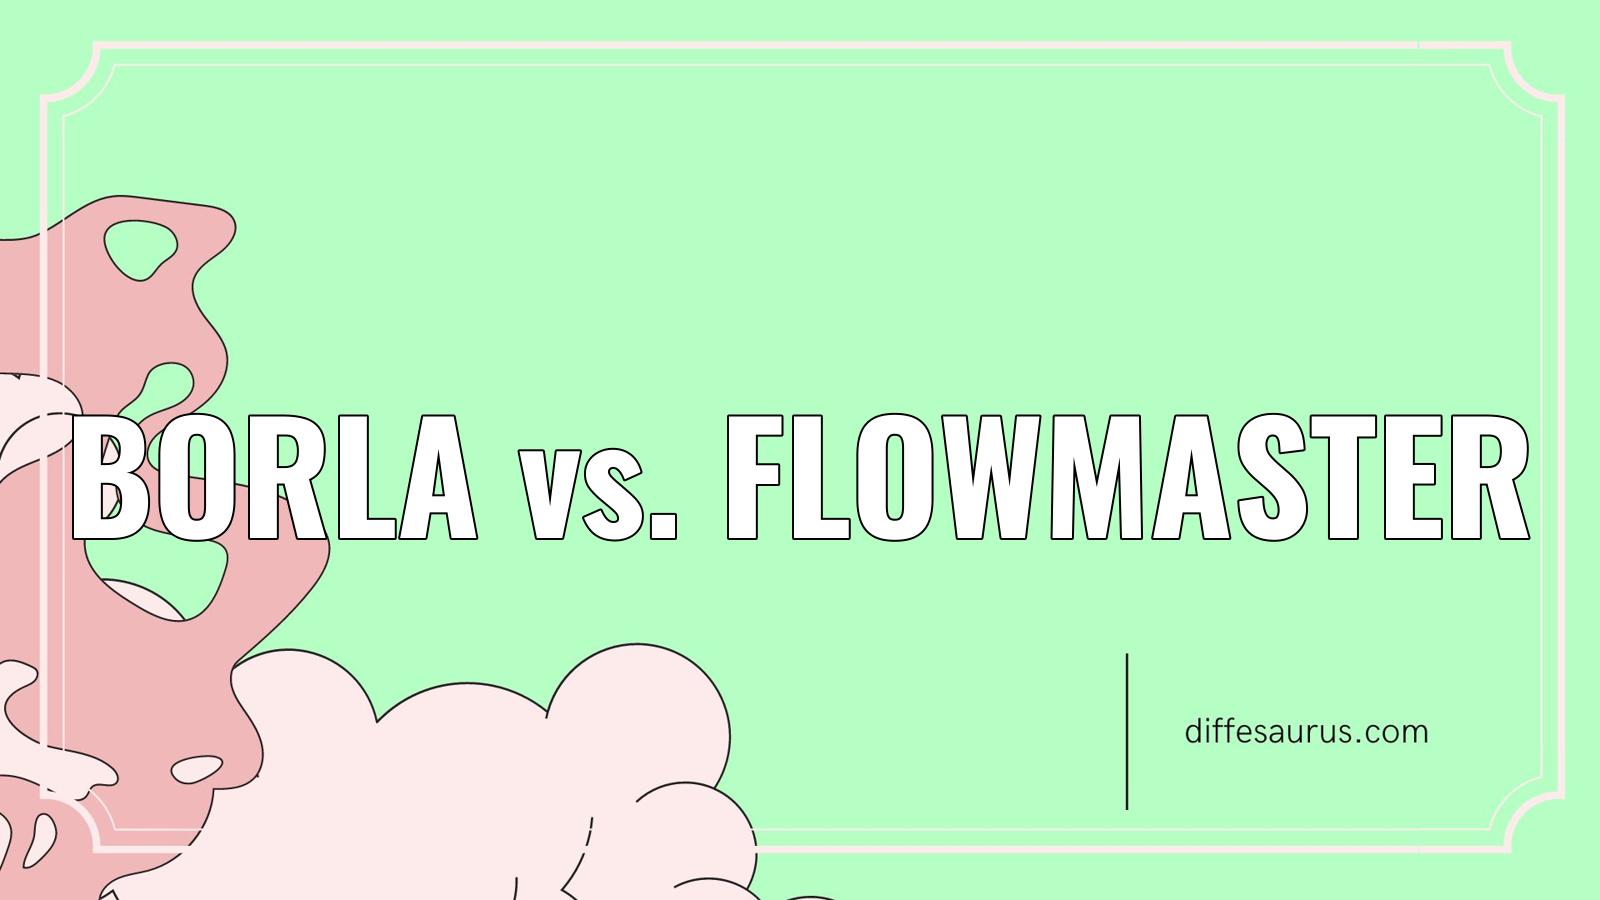 You are currently viewing Difference Between Borla and Flowmaster Explained